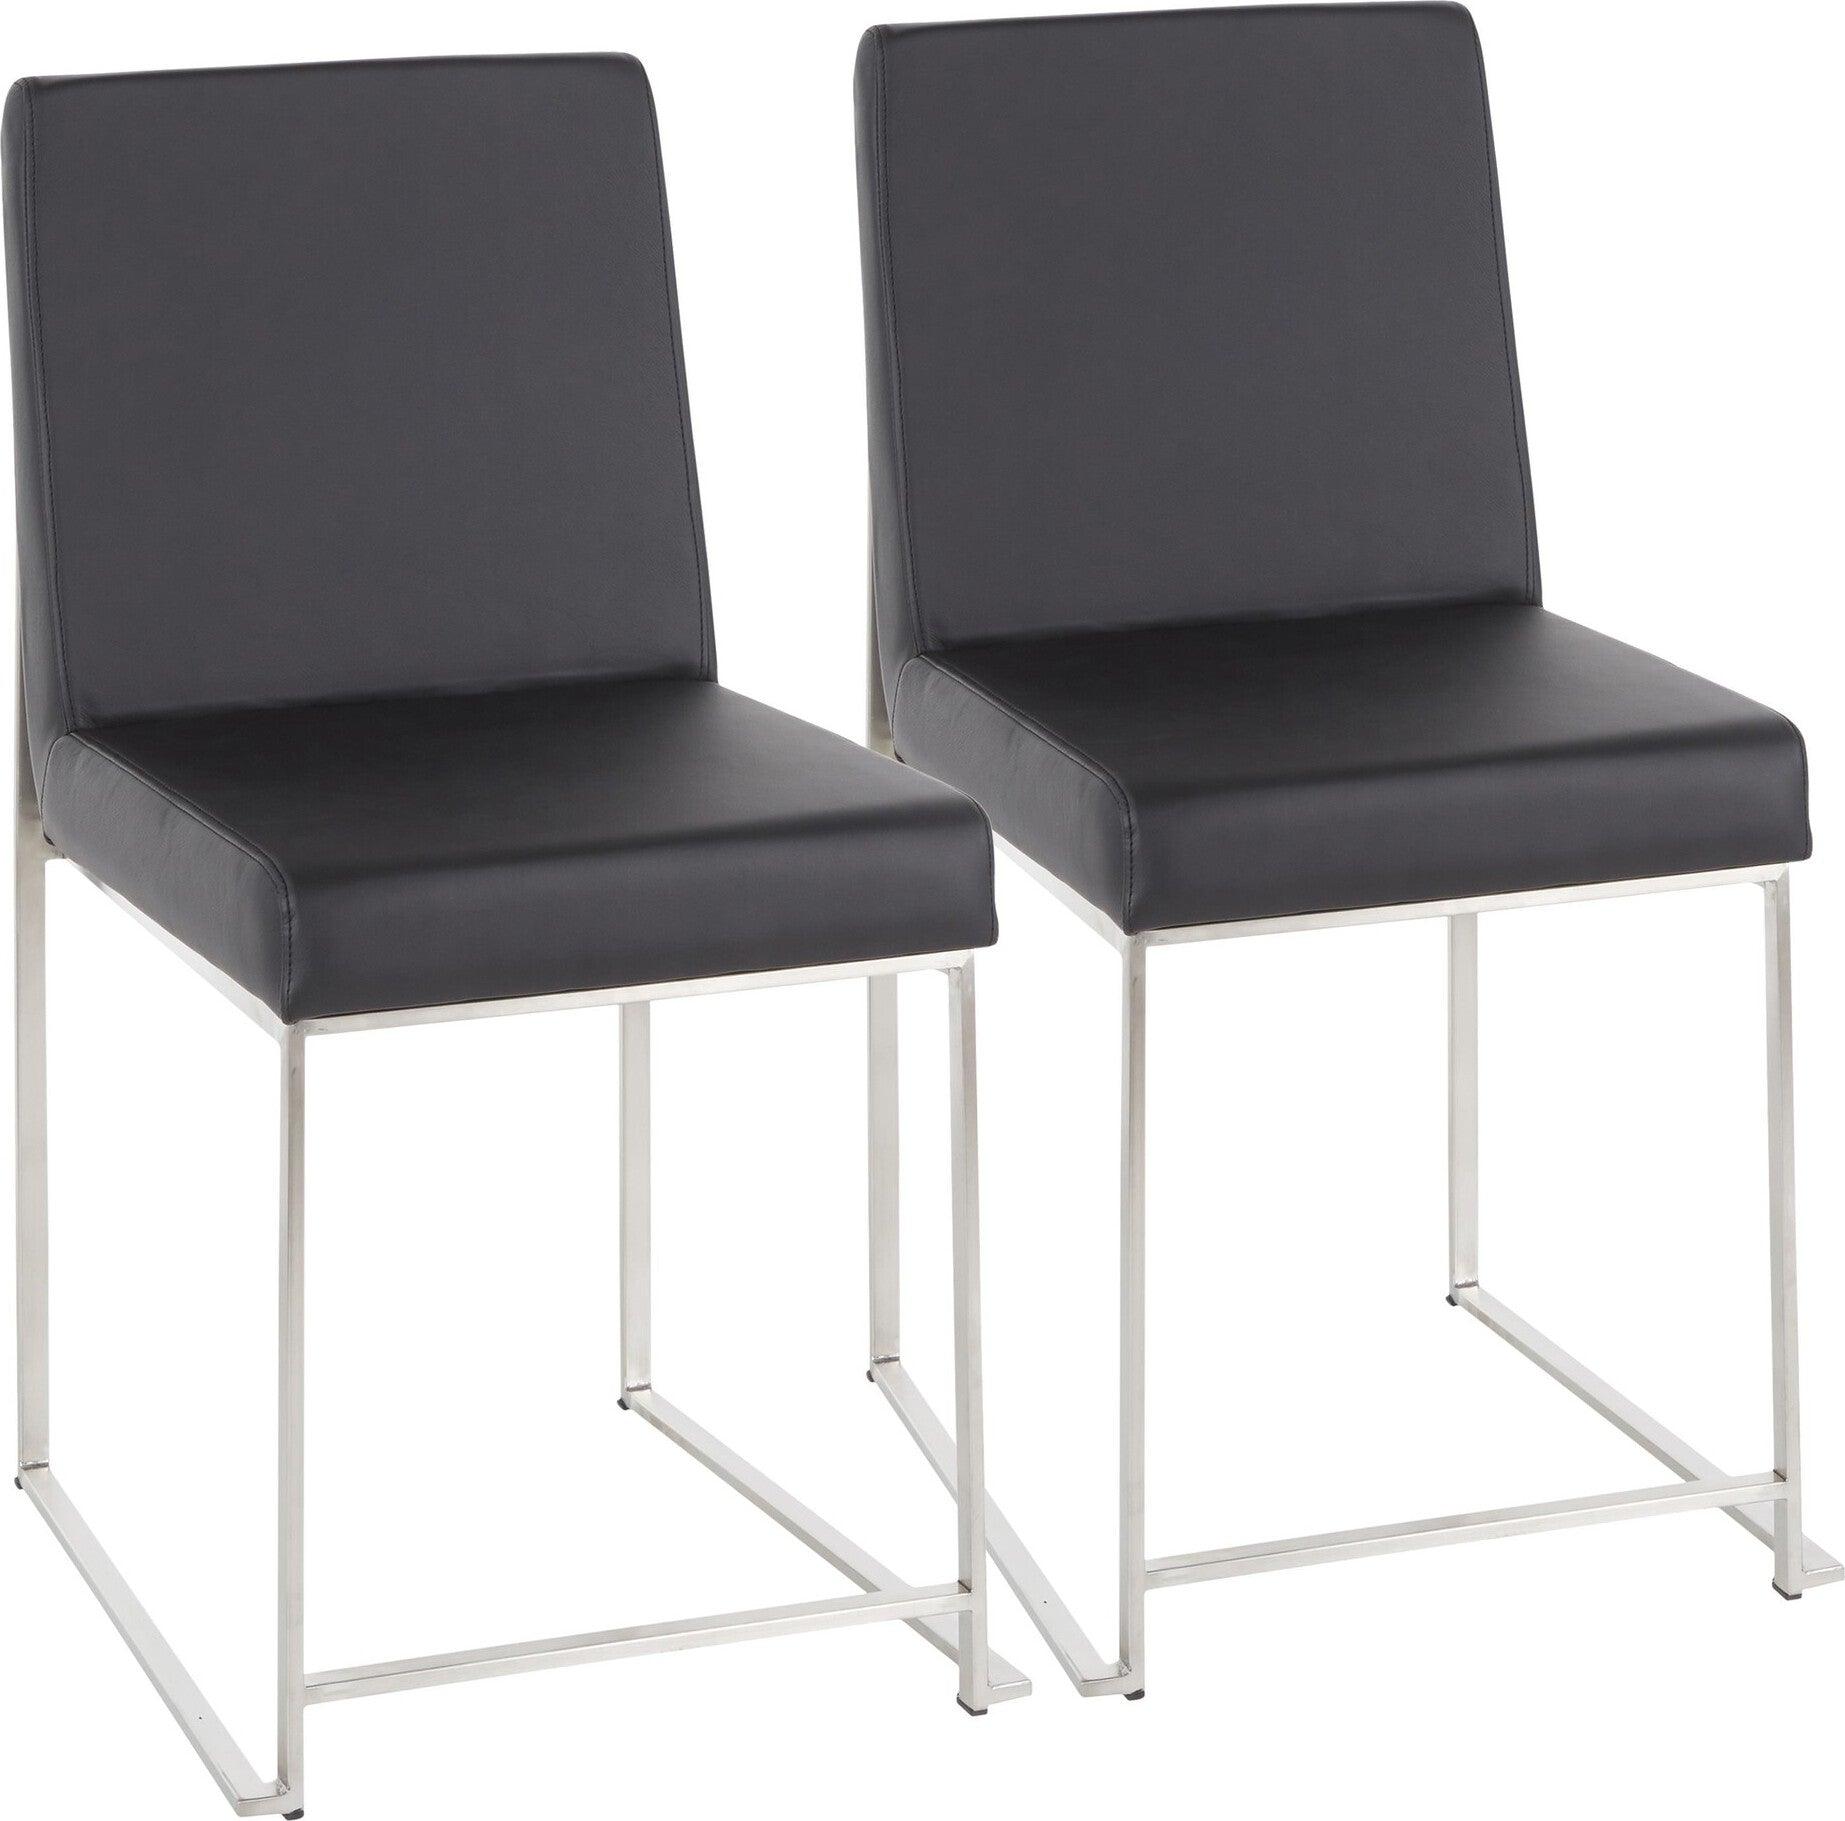 Lumisource Dining Chairs - High Back Fuji Contemporary Dining Chair in Stainless Steel and Black Faux Leather (Set of 2)